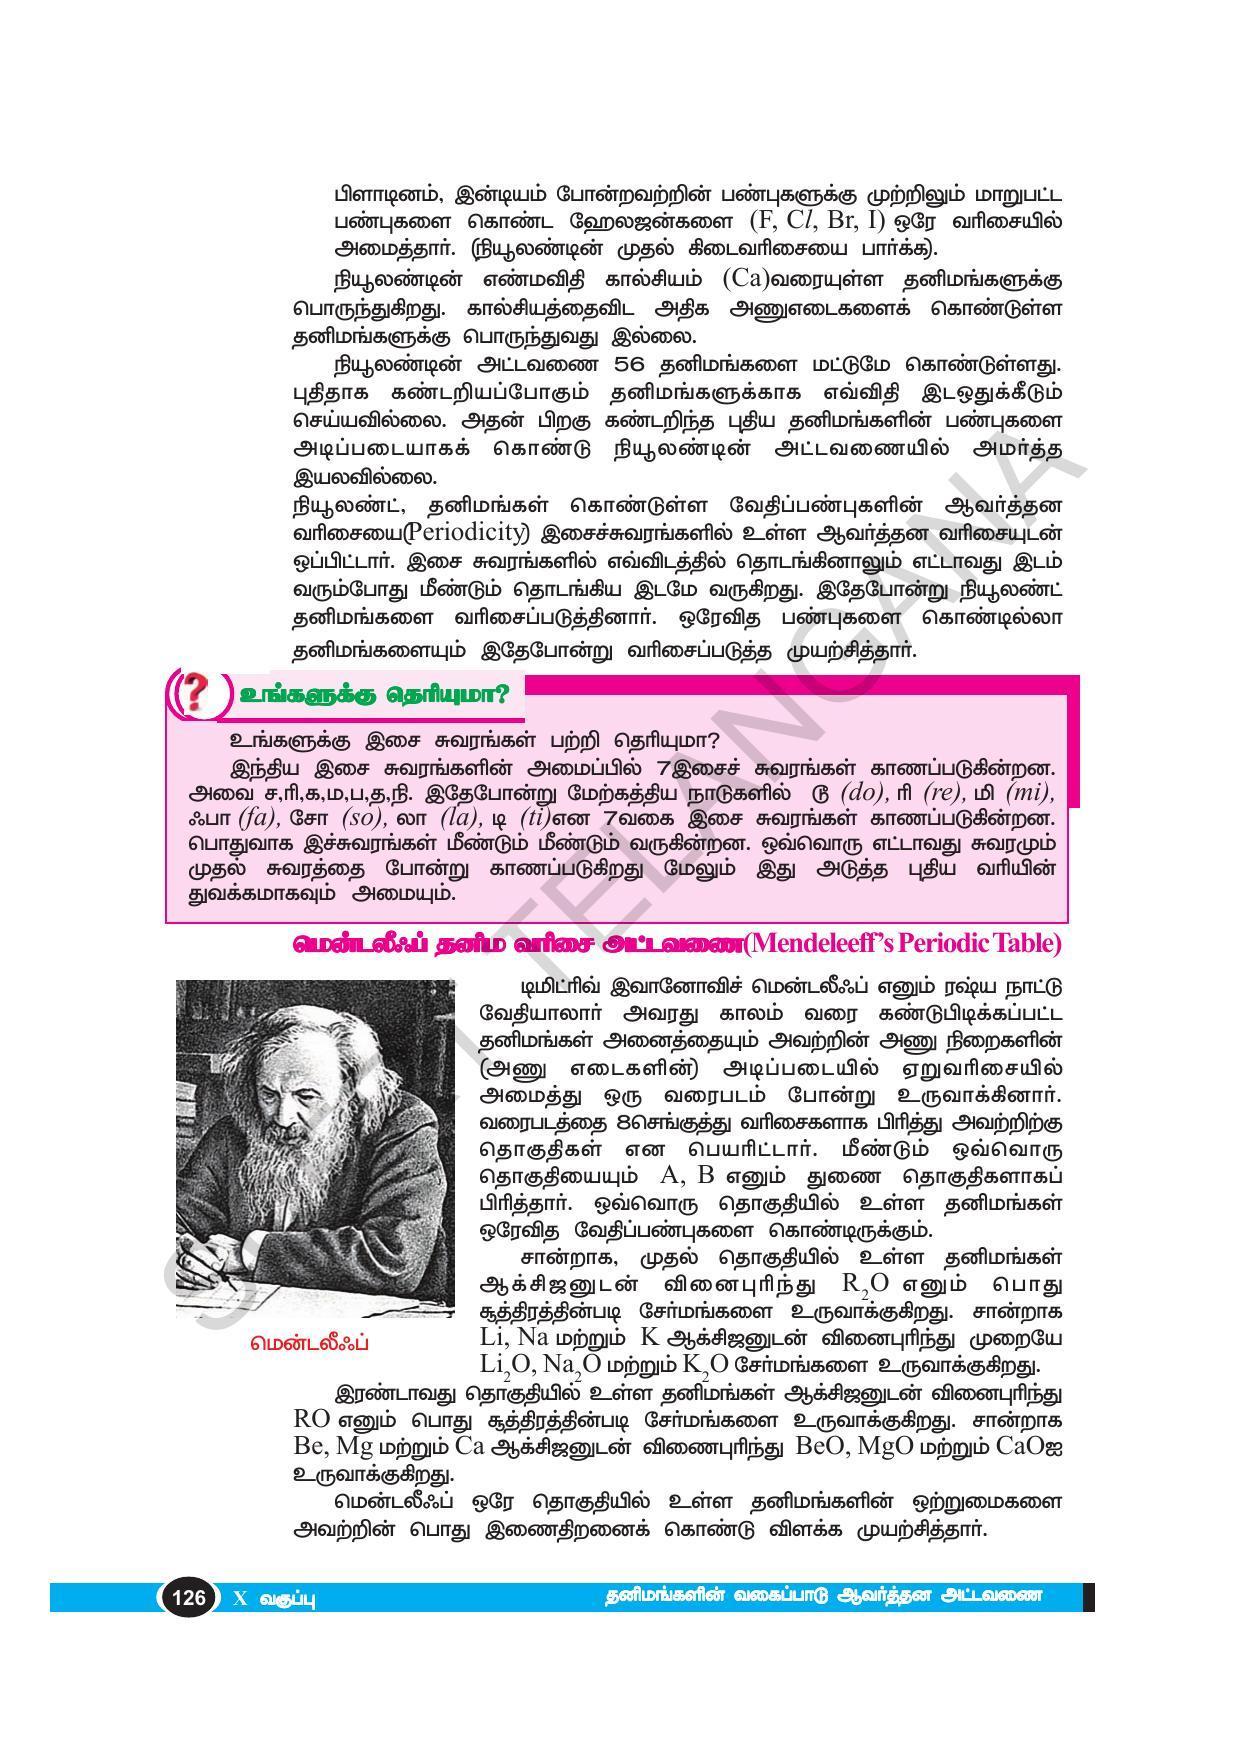 TS SCERT Class 10 Physical Science(Tamil Medium) Text Book - Page 138